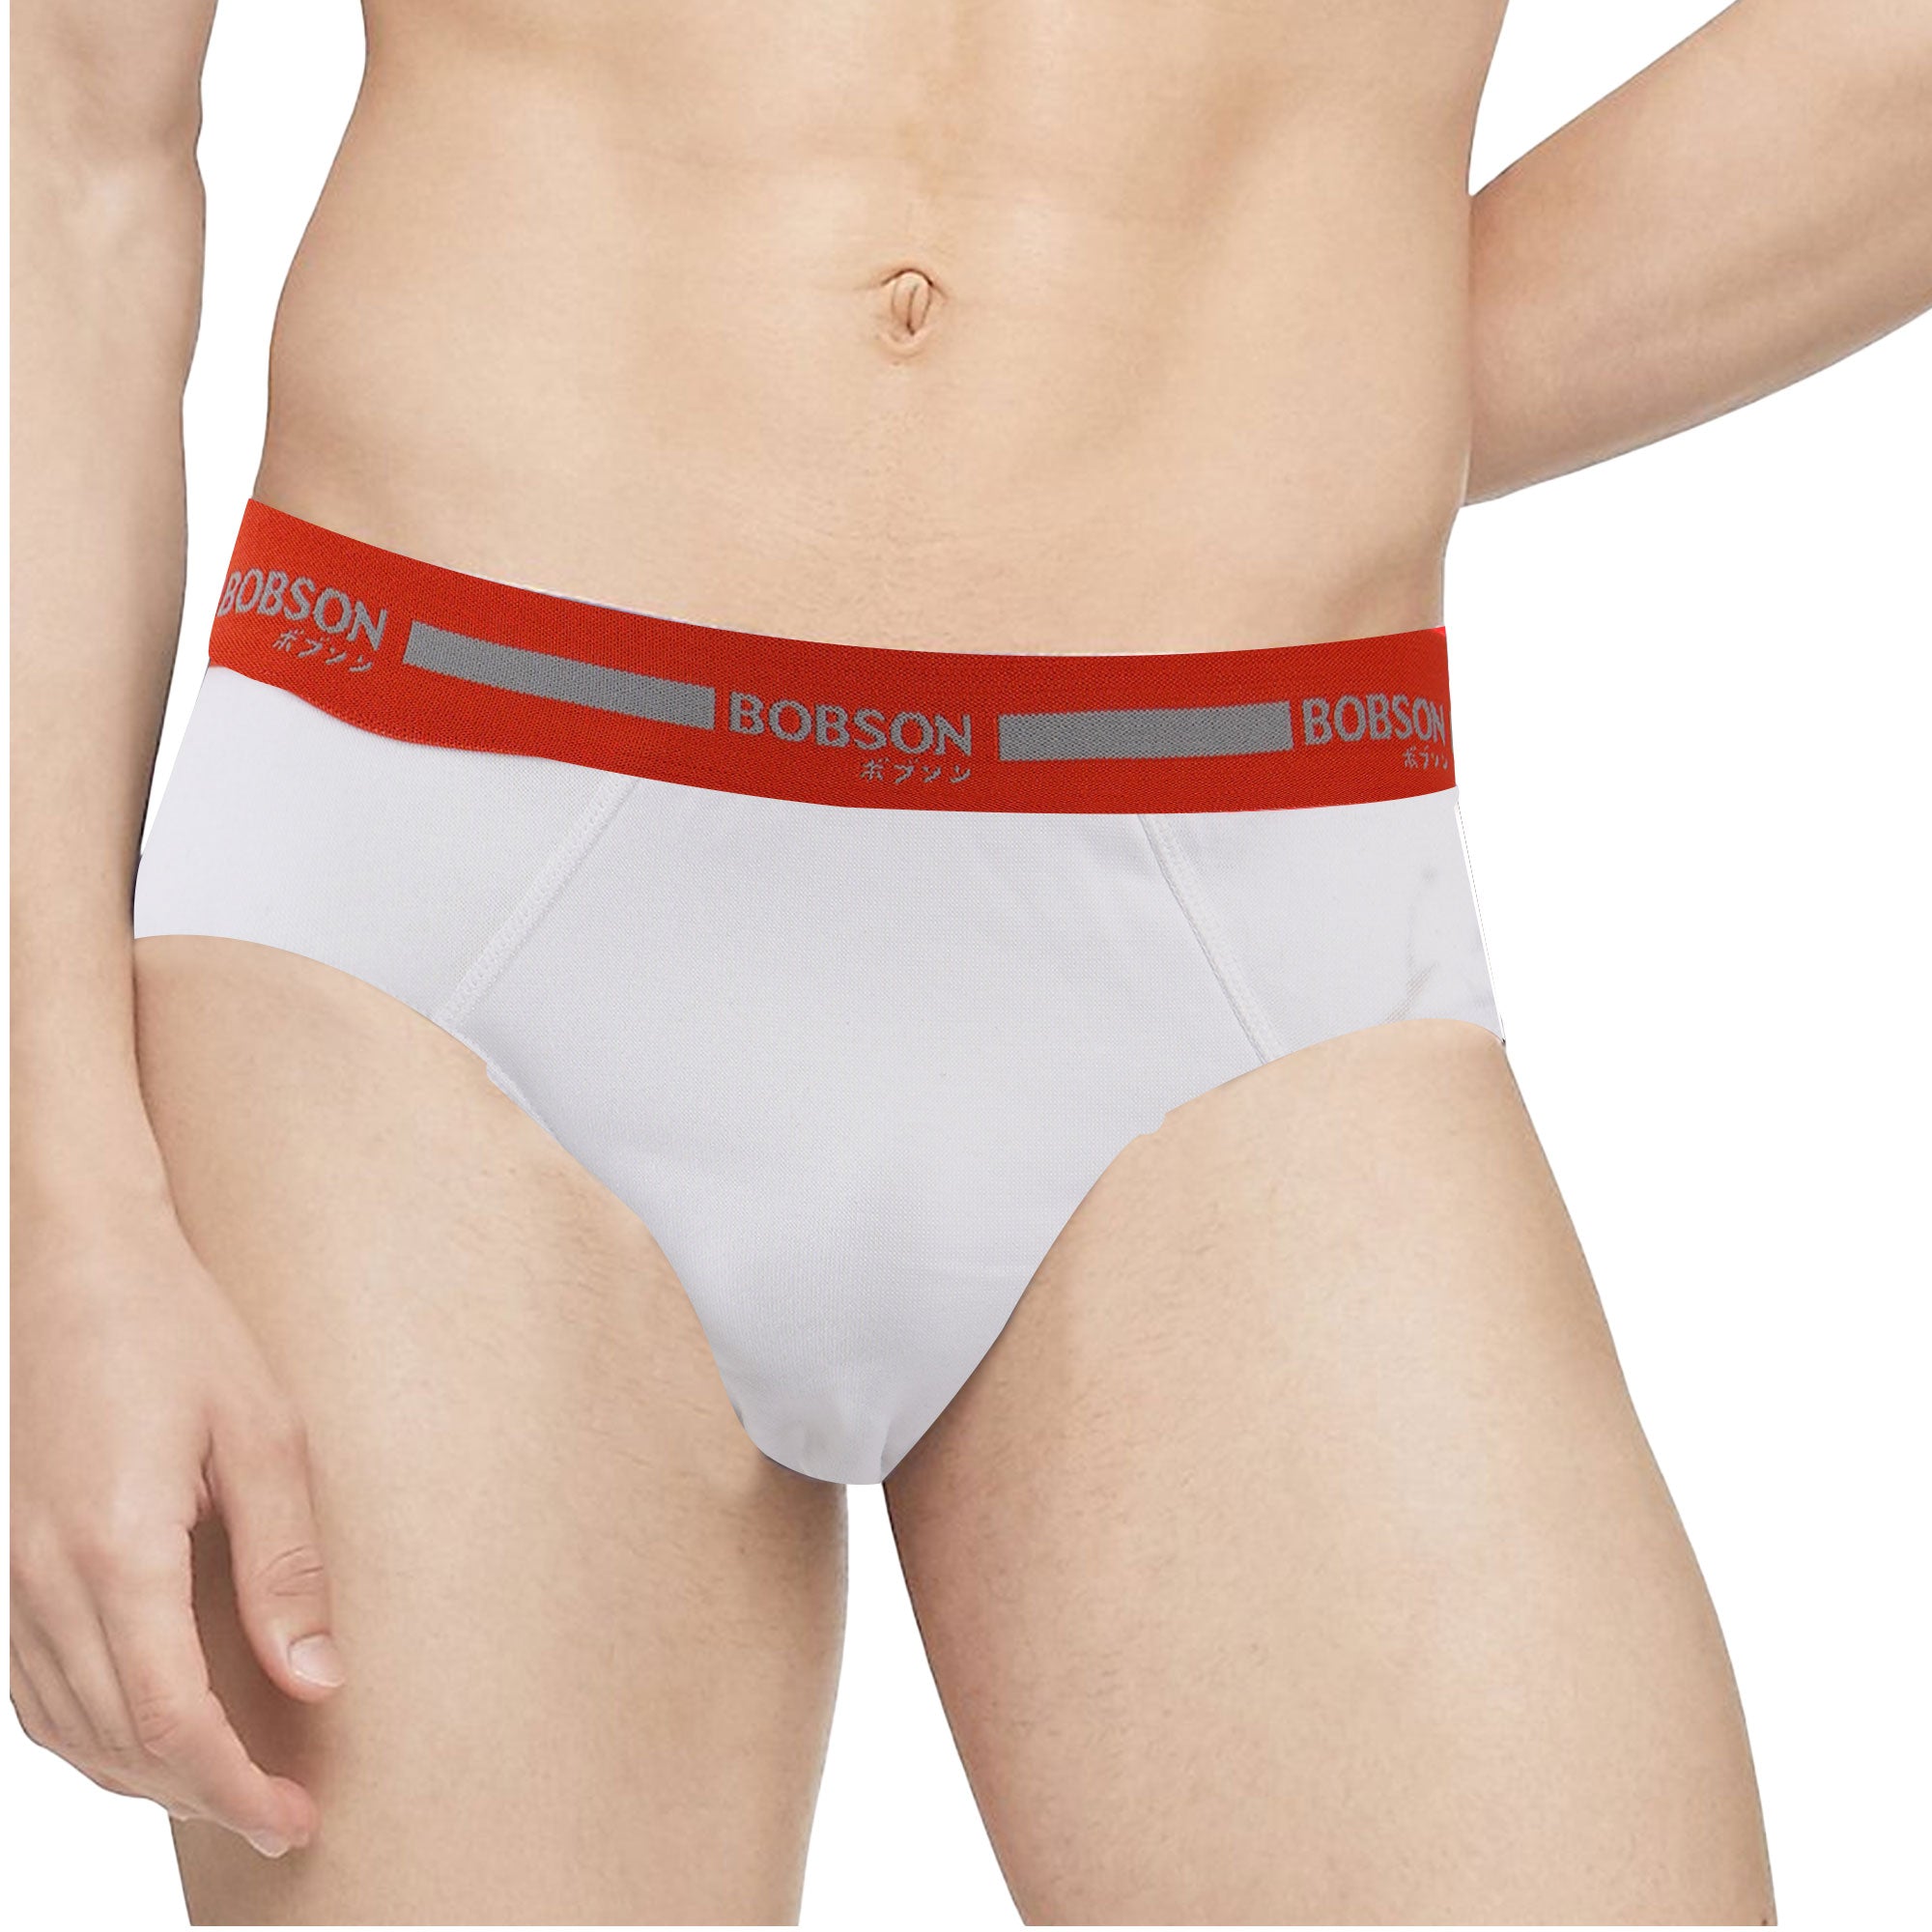 Bobson Japanese Men's Accessories Basic Innerwear Casual Apparel Trendy Fashion High Quality Hipster Brief 130386 (White)